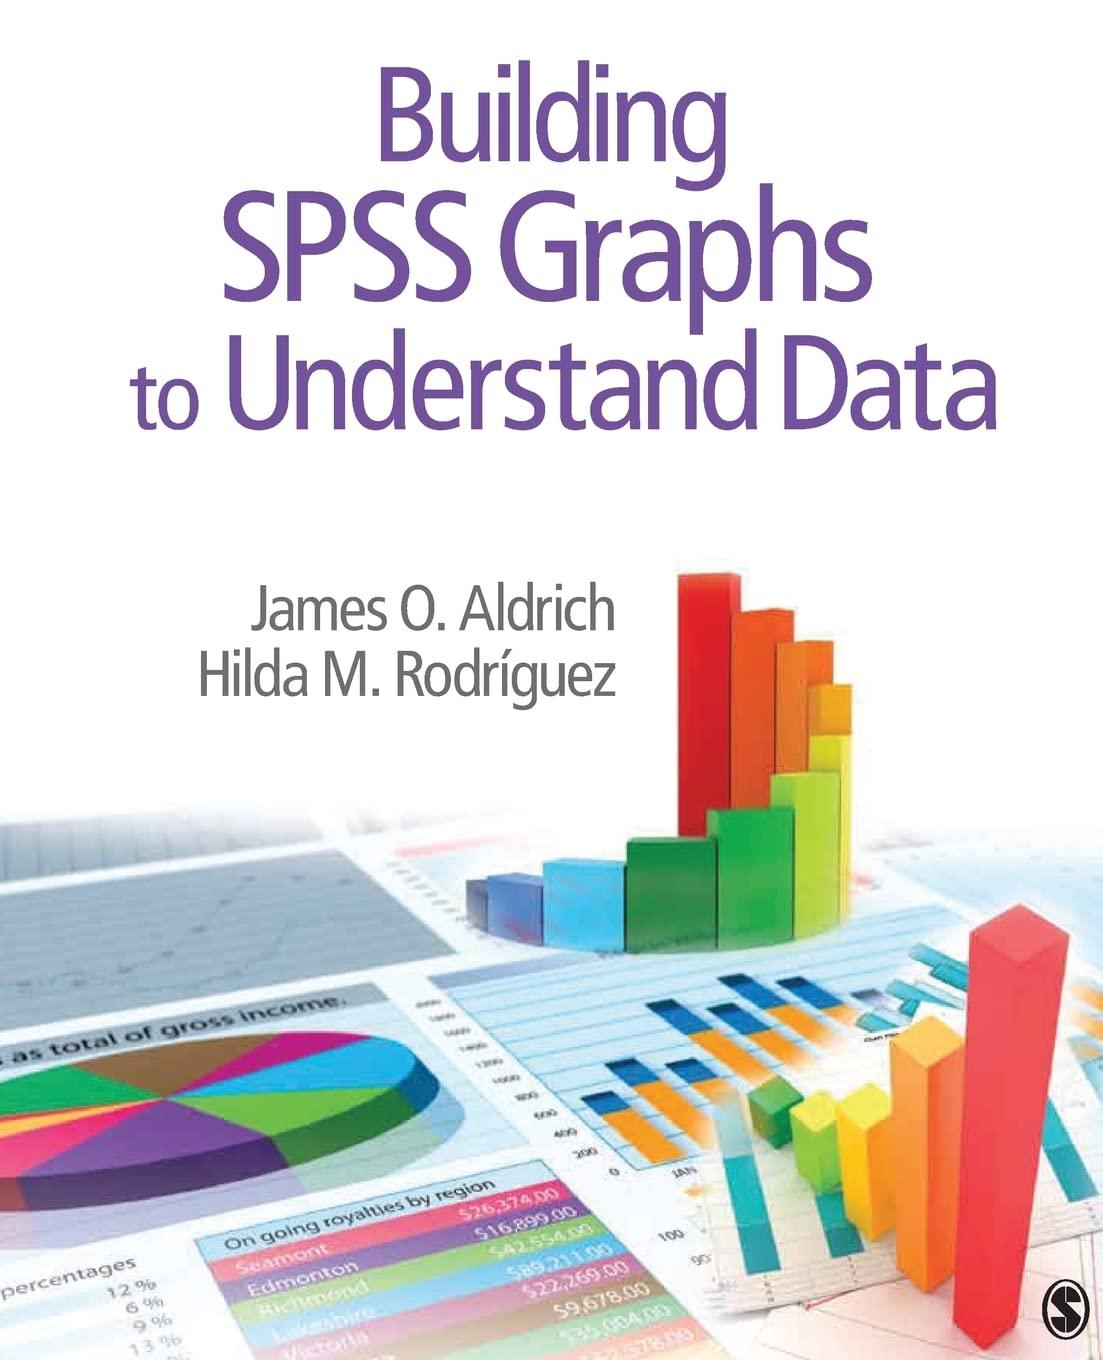 Building SPSS Graphs To Understand Data